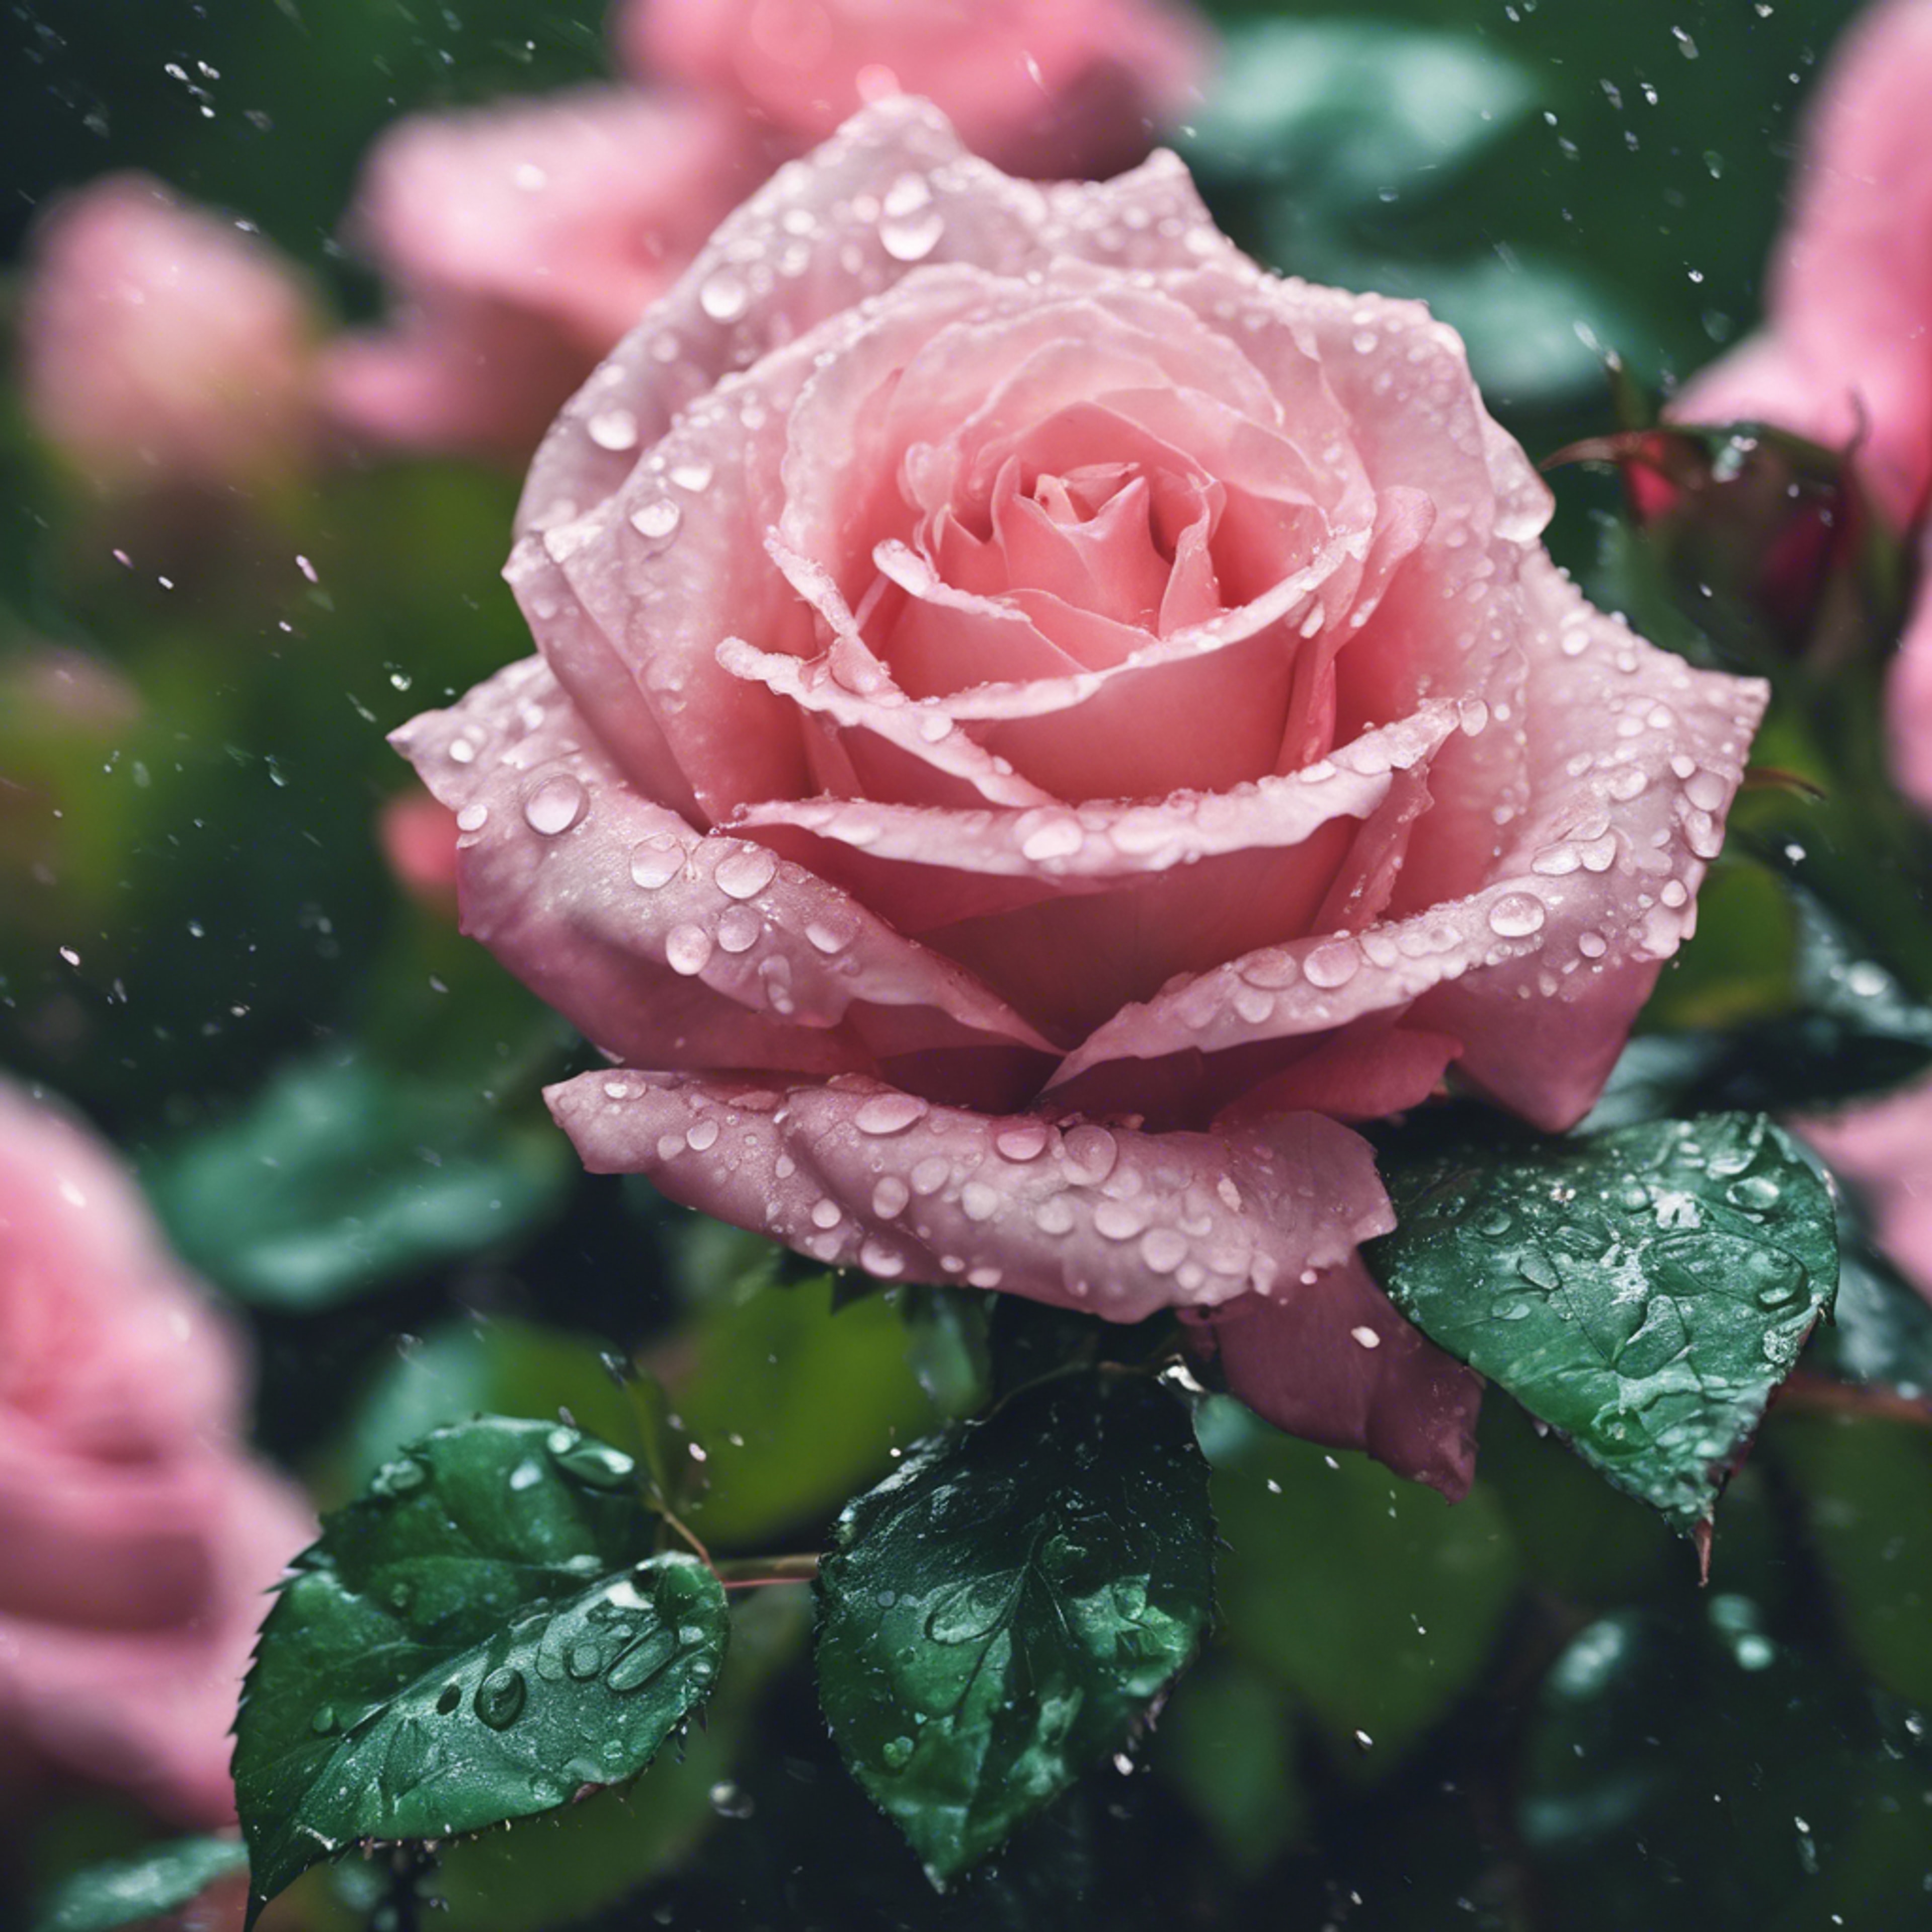 Gentle rain falling on the bright green leaves and pink roses. Hintergrund[2479f95970de45b492b9]